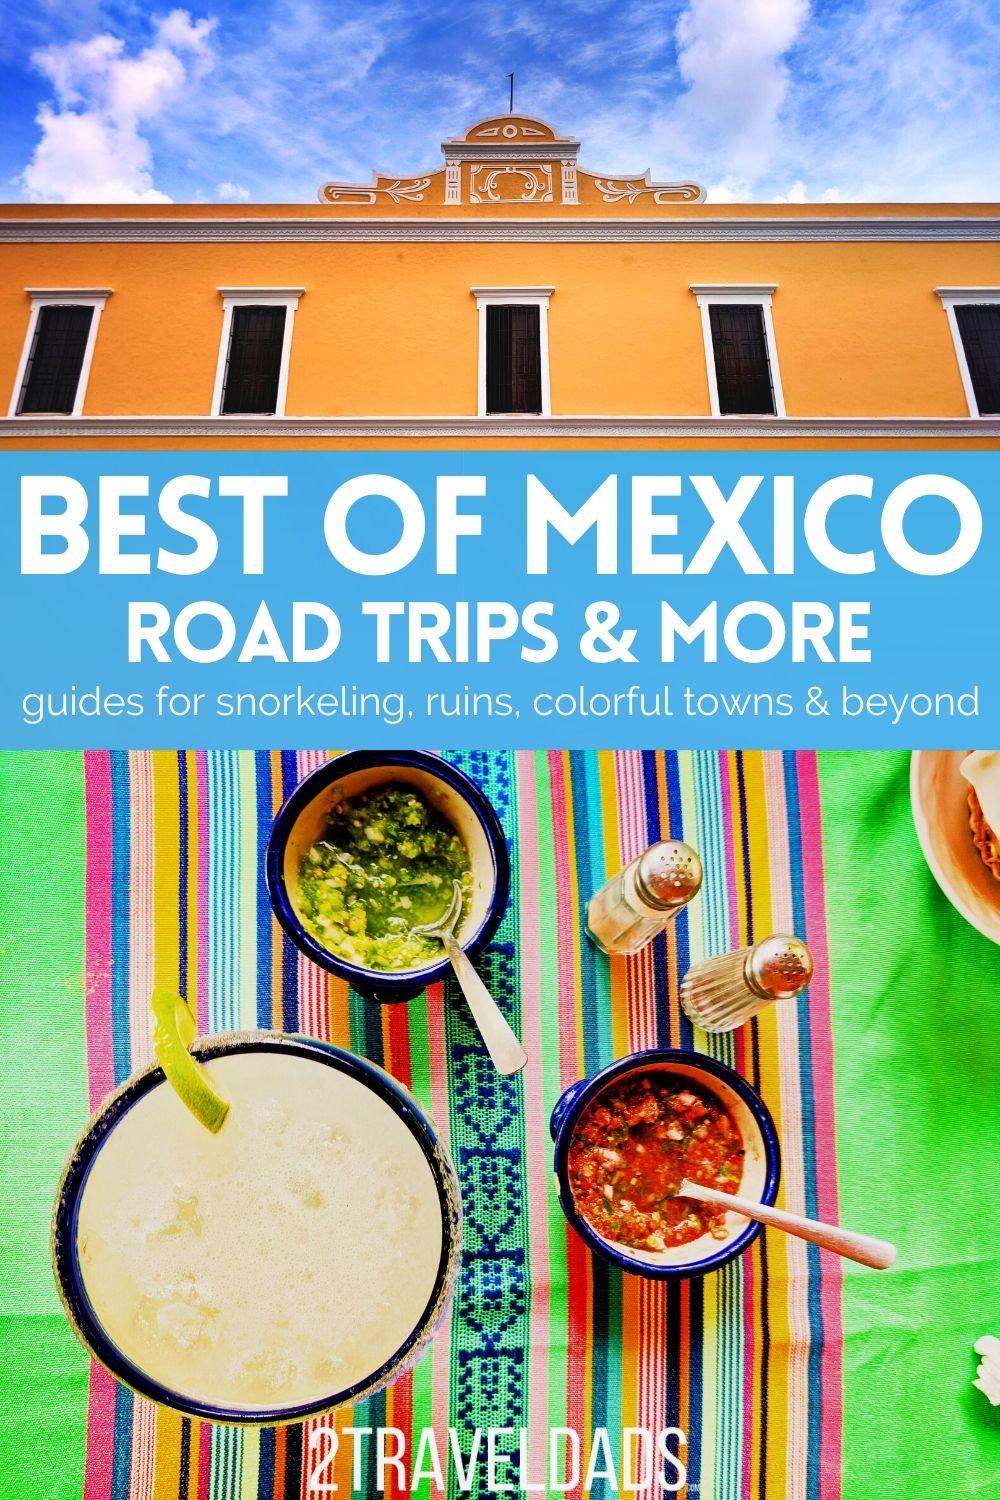 Mexico destinations with travel plans and activities for every pace and budget. From hotels on the beach to swimming in the jungle, Mexican vacation destinations from Cancun to Cabo San Lucas.